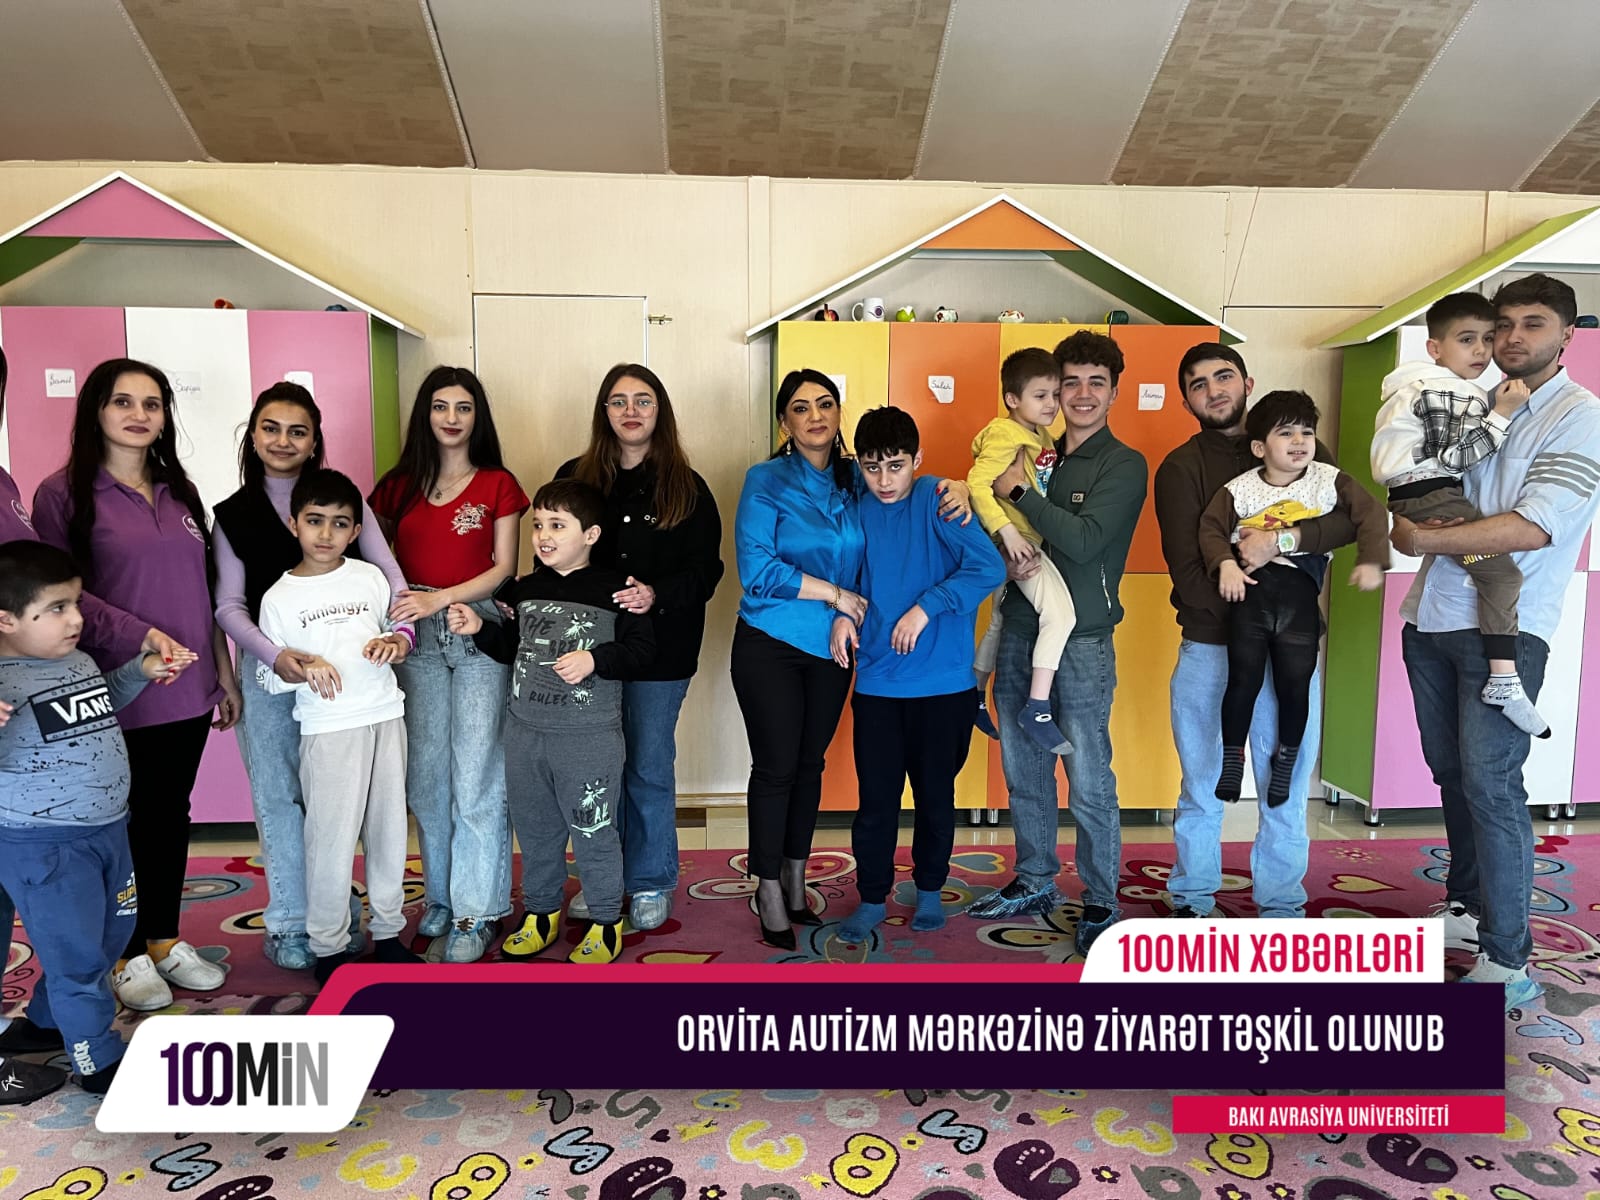 A visit to the Orvita Autism Center dedicated to "April 2 - World Autism Awareness Day" was organized